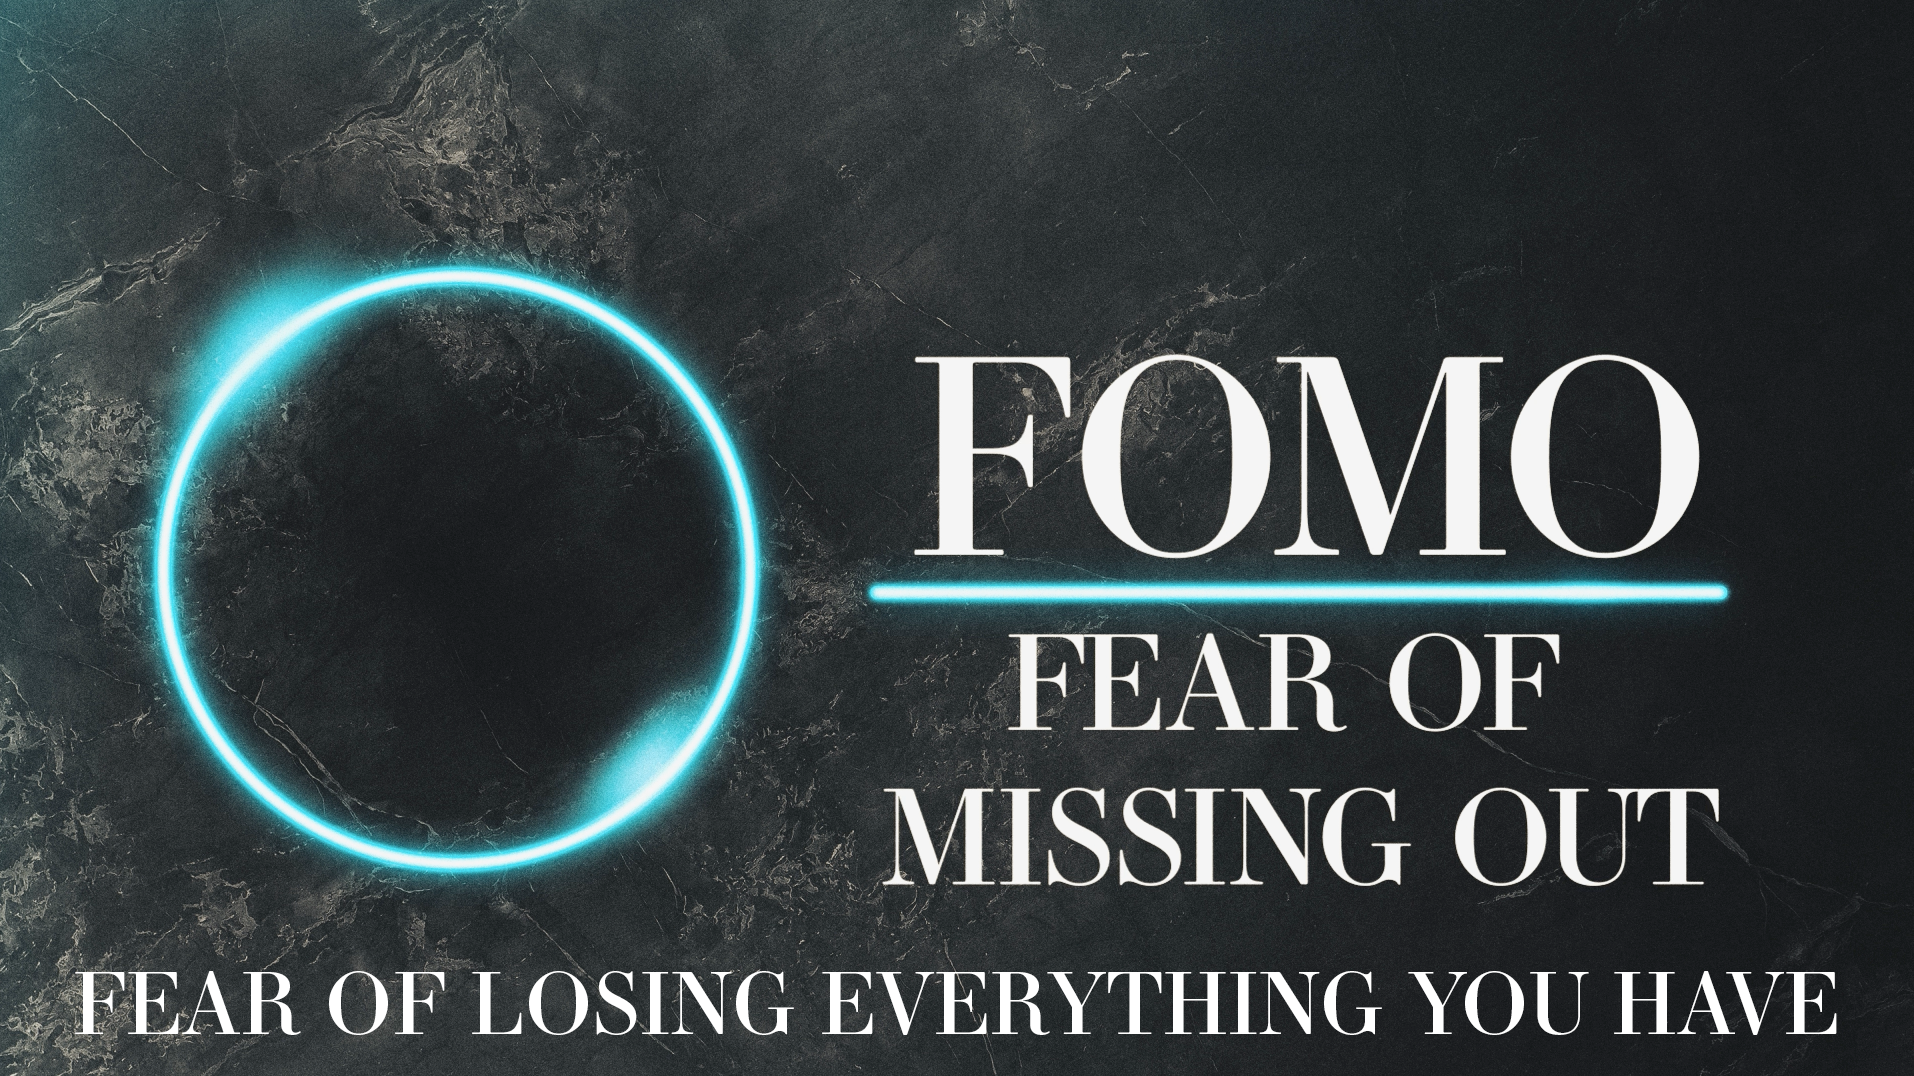 FOMO PART 6 "Fear of Losing Everything" (THRIVE Service)